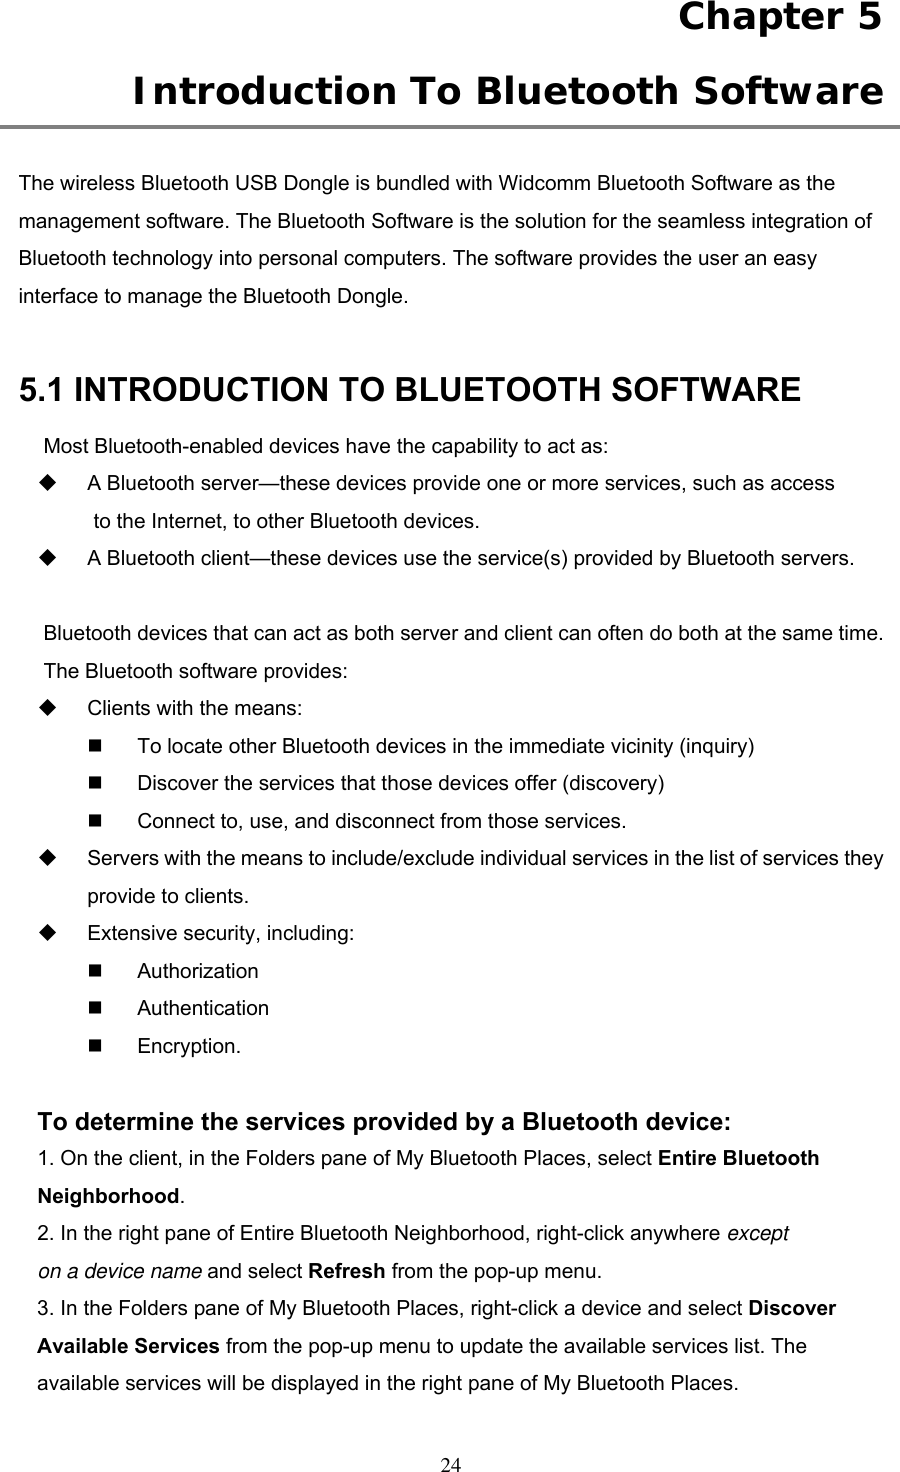 Chapter 5  Introduction To Bluetooth Software  The wireless Bluetooth USB Dongle is bundled with Widcomm Bluetooth Software as the management software. The Bluetooth Software is the solution for the seamless integration of Bluetooth technology into personal computers. The software provides the user an easy interface to manage the Bluetooth Dongle.    5.1 INTRODUCTION TO BLUETOOTH SOFTWARE Most Bluetooth-enabled devices have the capability to act as:   A Bluetooth server—these devices provide one or more services, such as access to the Internet, to other Bluetooth devices.   A Bluetooth client—these devices use the service(s) provided by Bluetooth servers.  Bluetooth devices that can act as both server and client can often do both at the same time. The Bluetooth software provides:   Clients with the means:   To locate other Bluetooth devices in the immediate vicinity (inquiry)   Discover the services that those devices offer (discovery)   Connect to, use, and disconnect from those services.   Servers with the means to include/exclude individual services in the list of services they provide to clients.   Extensive security, including:   Authorization   Authentication   Encryption.  To determine the services provided by a Bluetooth device: 1. On the client, in the Folders pane of My Bluetooth Places, select Entire Bluetooth Neighborhood. 2. In the right pane of Entire Bluetooth Neighborhood, right-click anywhere except on a device name and select Refresh from the pop-up menu. 3. In the Folders pane of My Bluetooth Places, right-click a device and select Discover Available Services from the pop-up menu to update the available services list. The available services will be displayed in the right pane of My Bluetooth Places.  24 